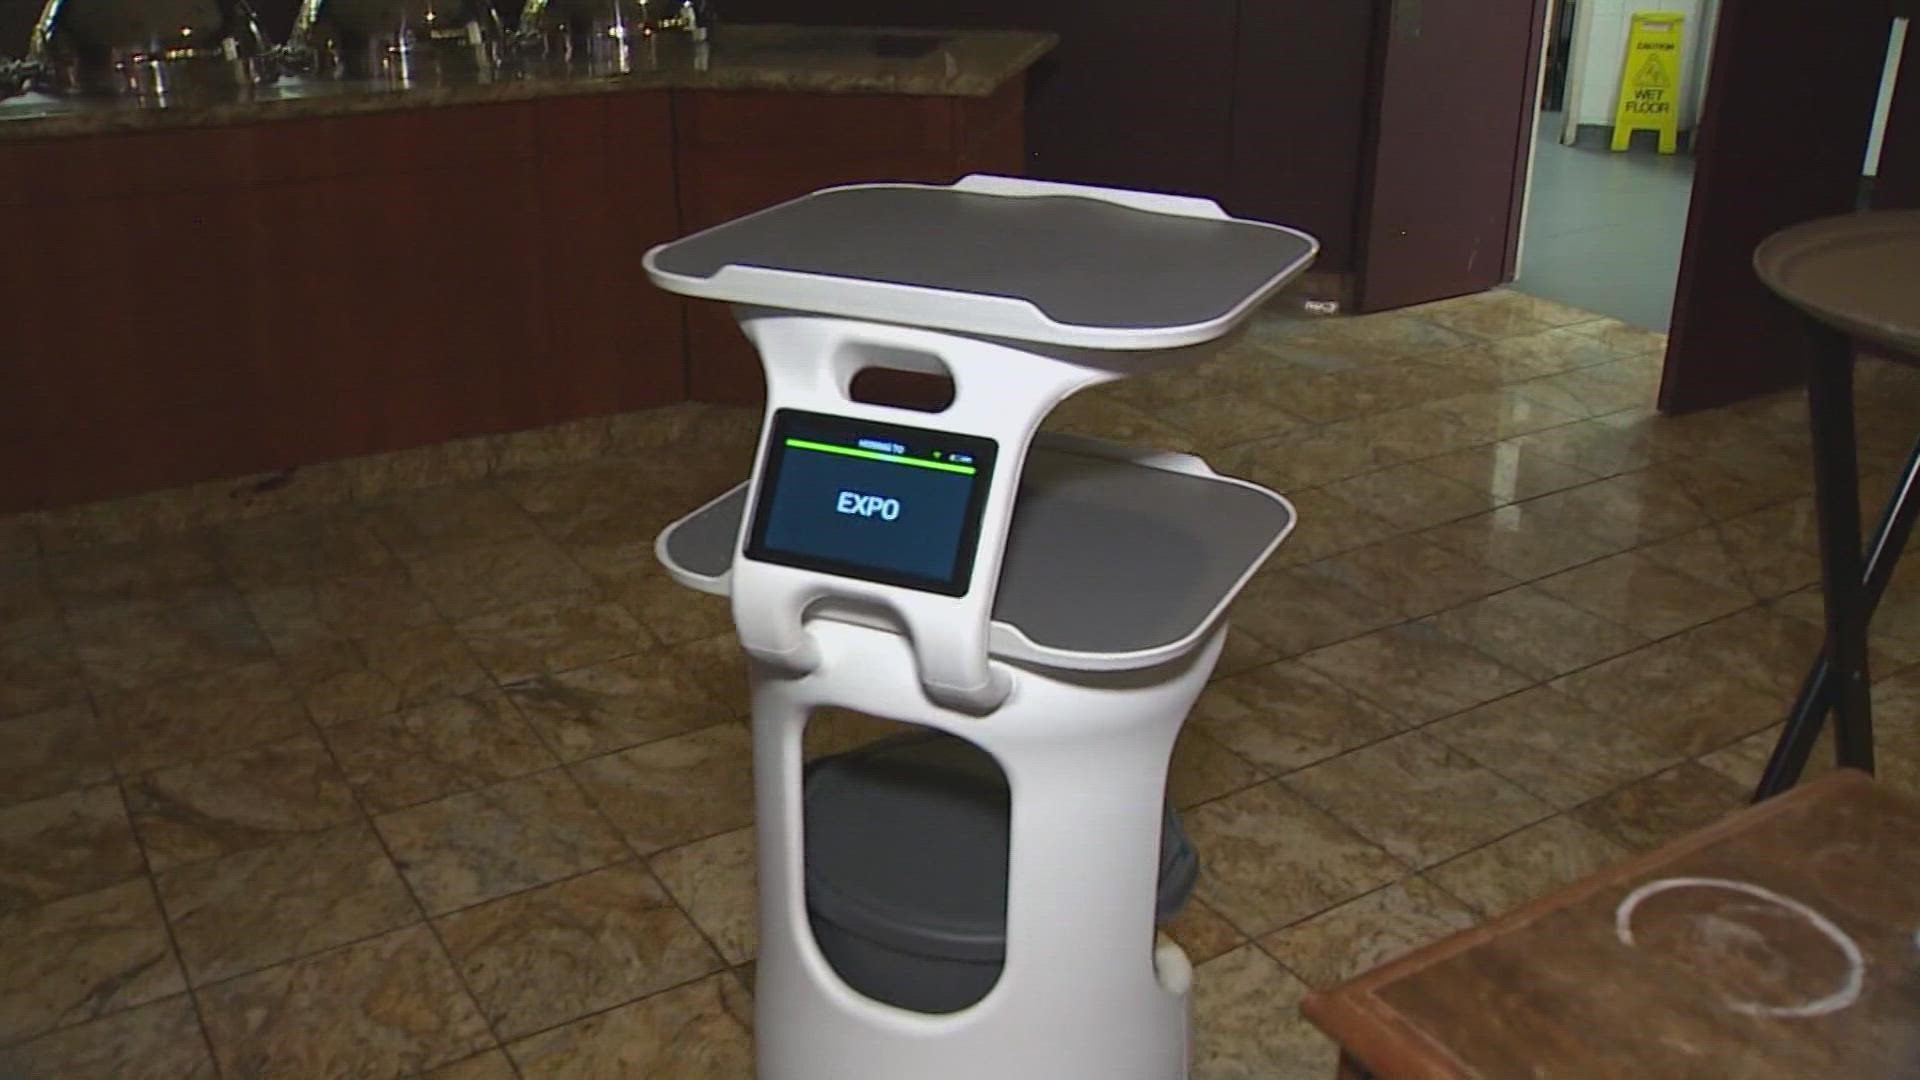 "What we’re finding is guests in the restaurant are coming because of the robot," said college Dean Dennis Reynolds.